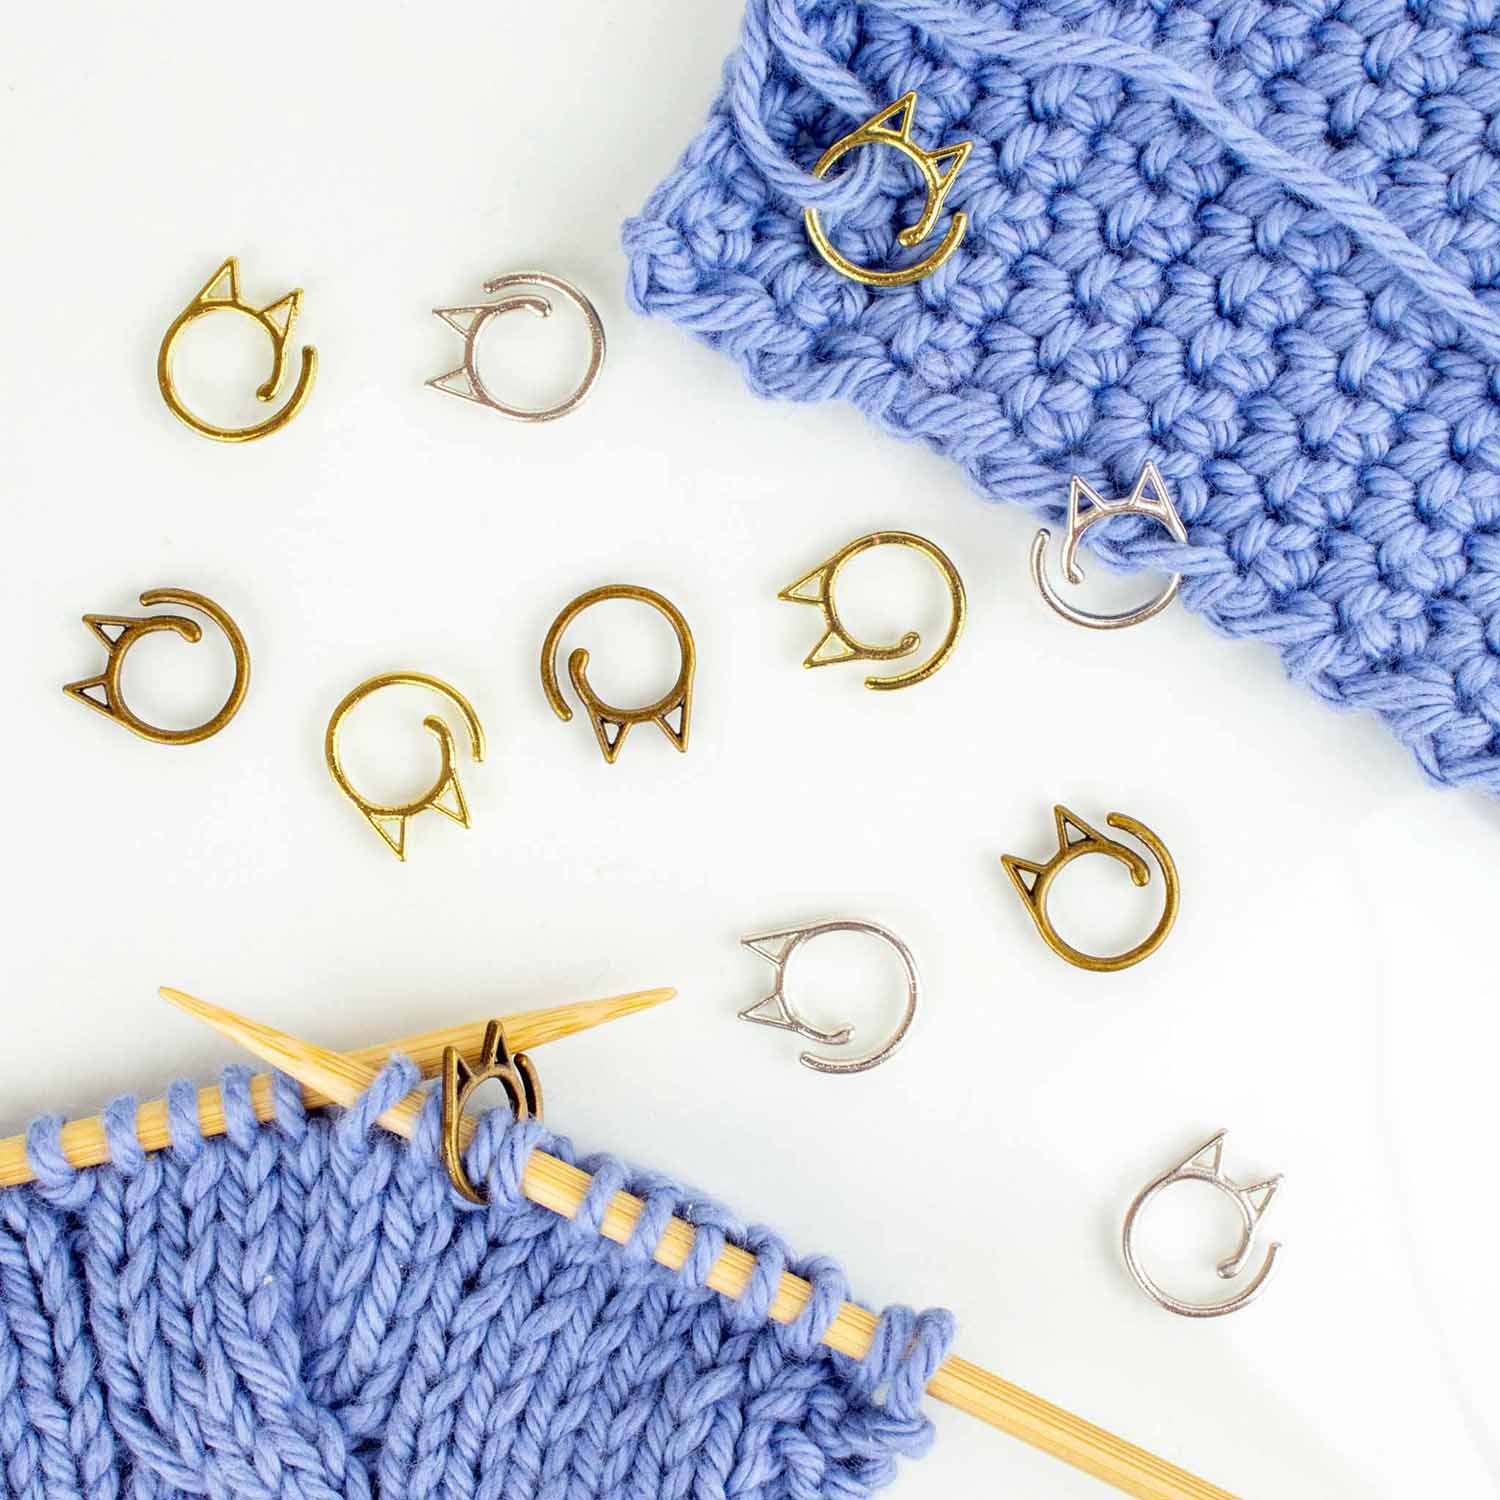 8 Ways Knitting With Stitch Markers Can Make Knitting Easier